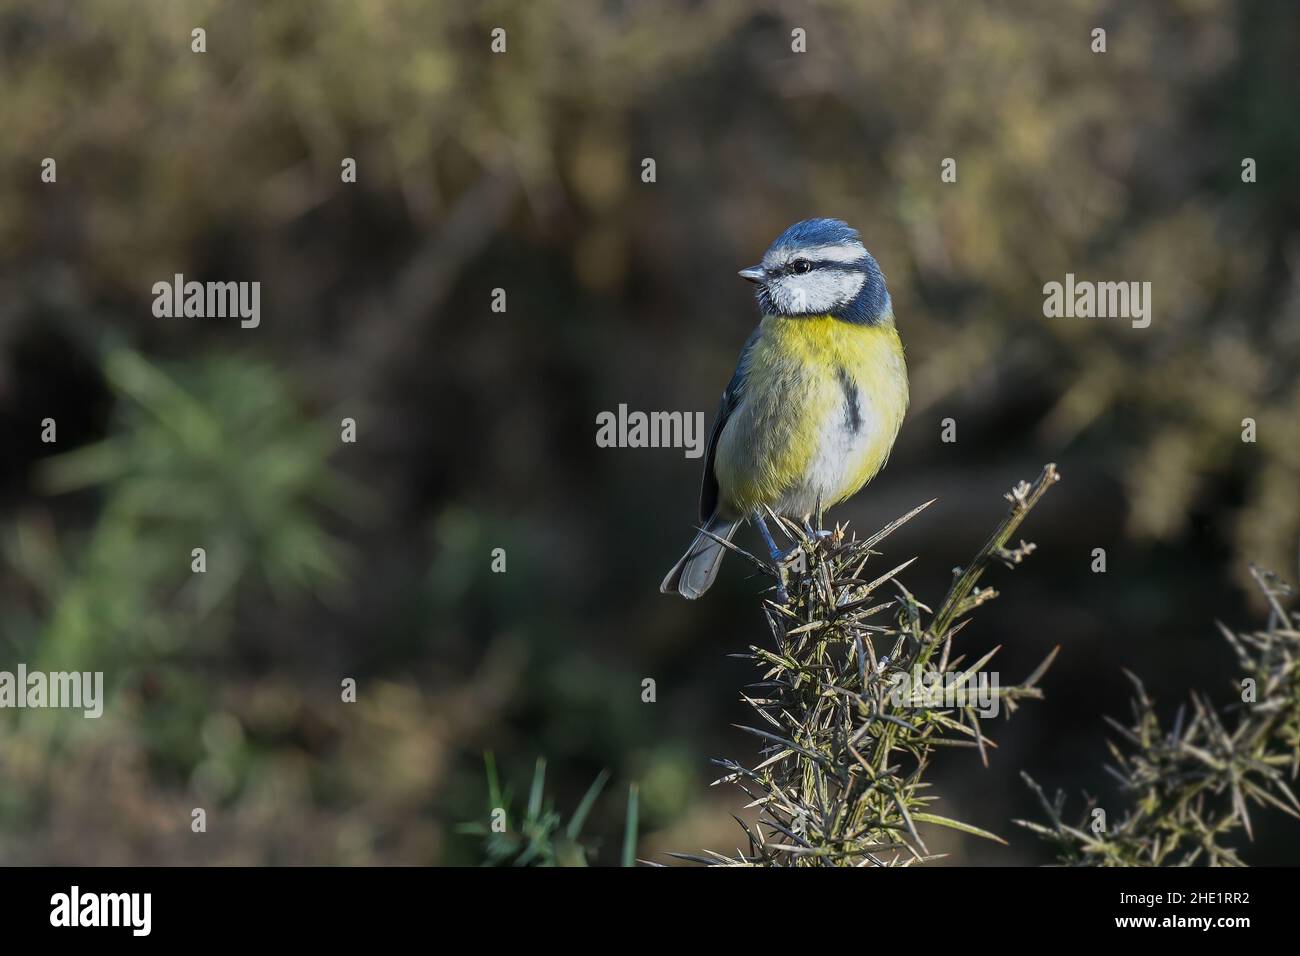 A portrait of a blue tit, Cyanistes caeruleus, as it sits perched on a gorse branch with a natural out of focus background Stock Photo